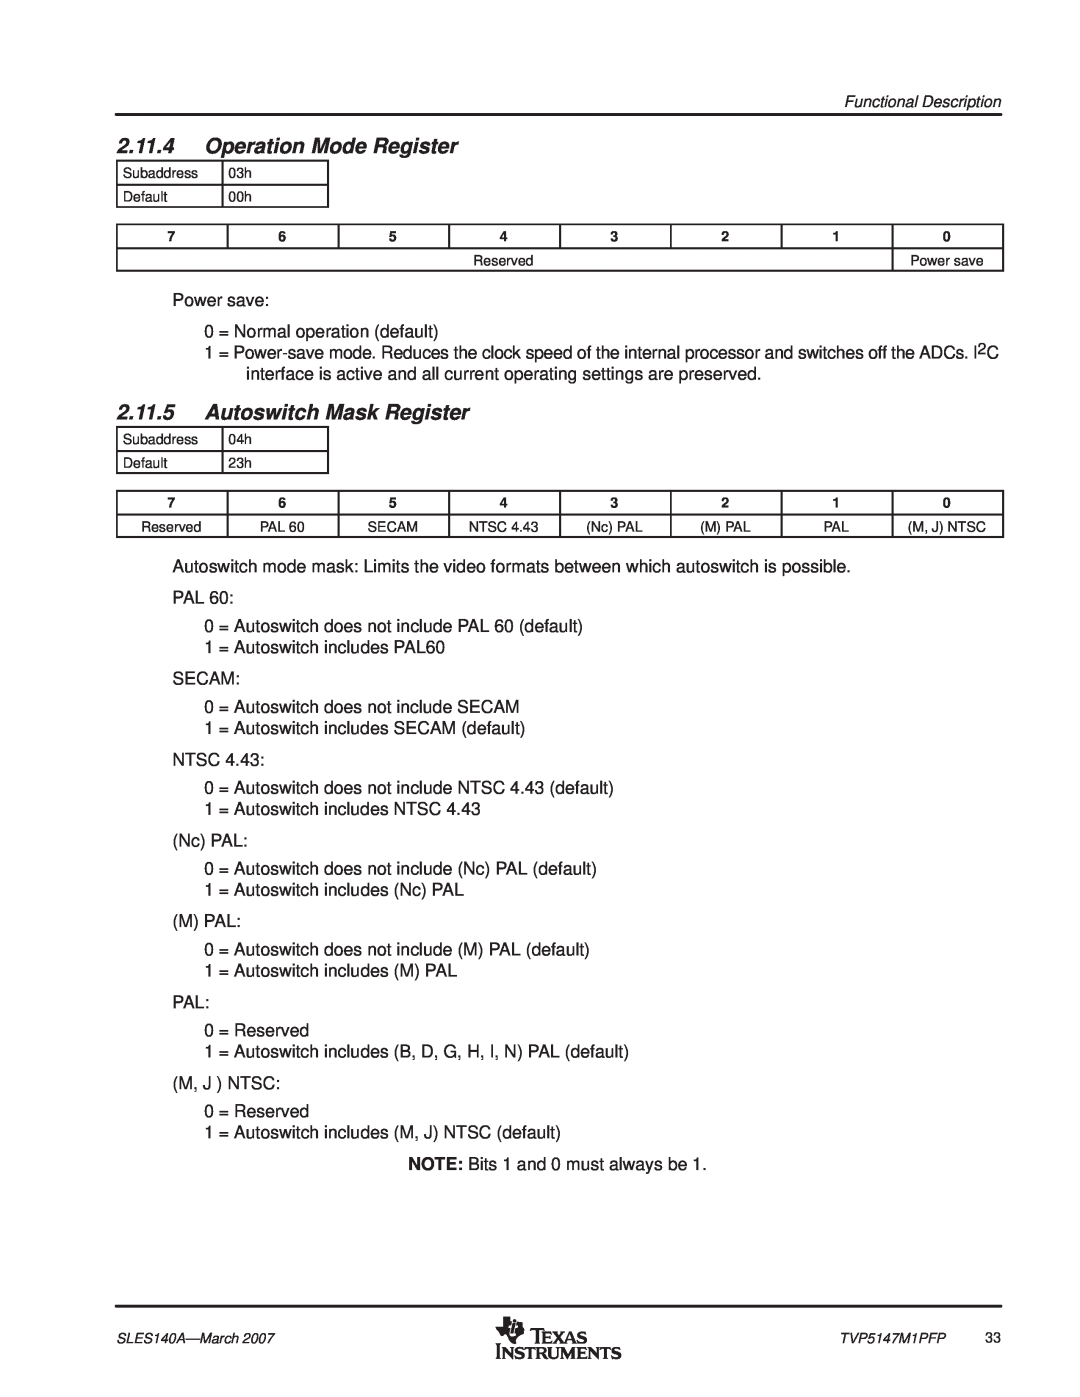 Texas Instruments TVP5147M1PFP manual Operation Mode Register, Autoswitch Mask Register 